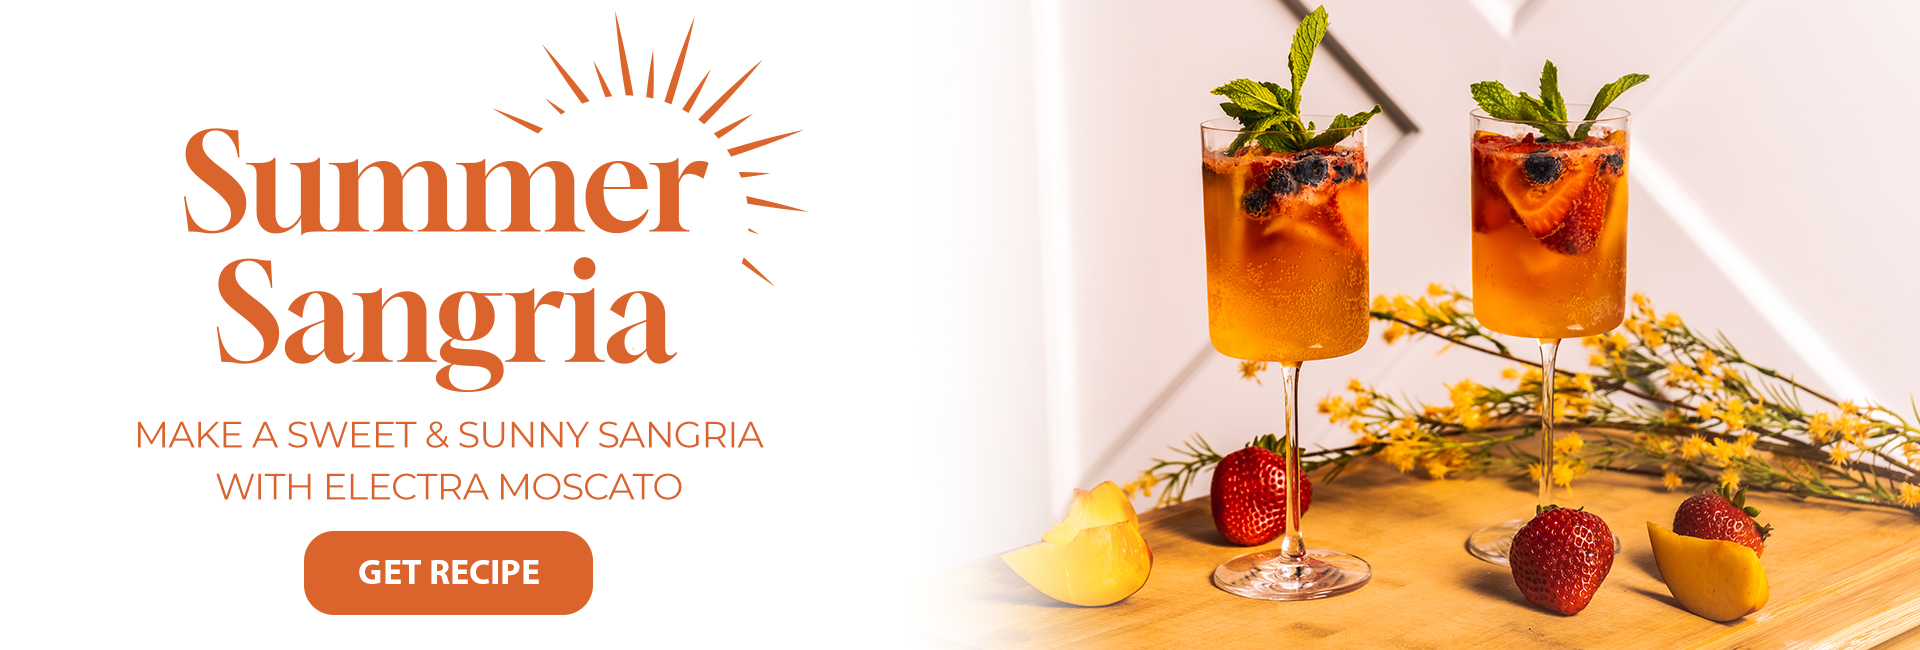 Summer Sangria - Make a sweet & sunny sangria with electra moscato